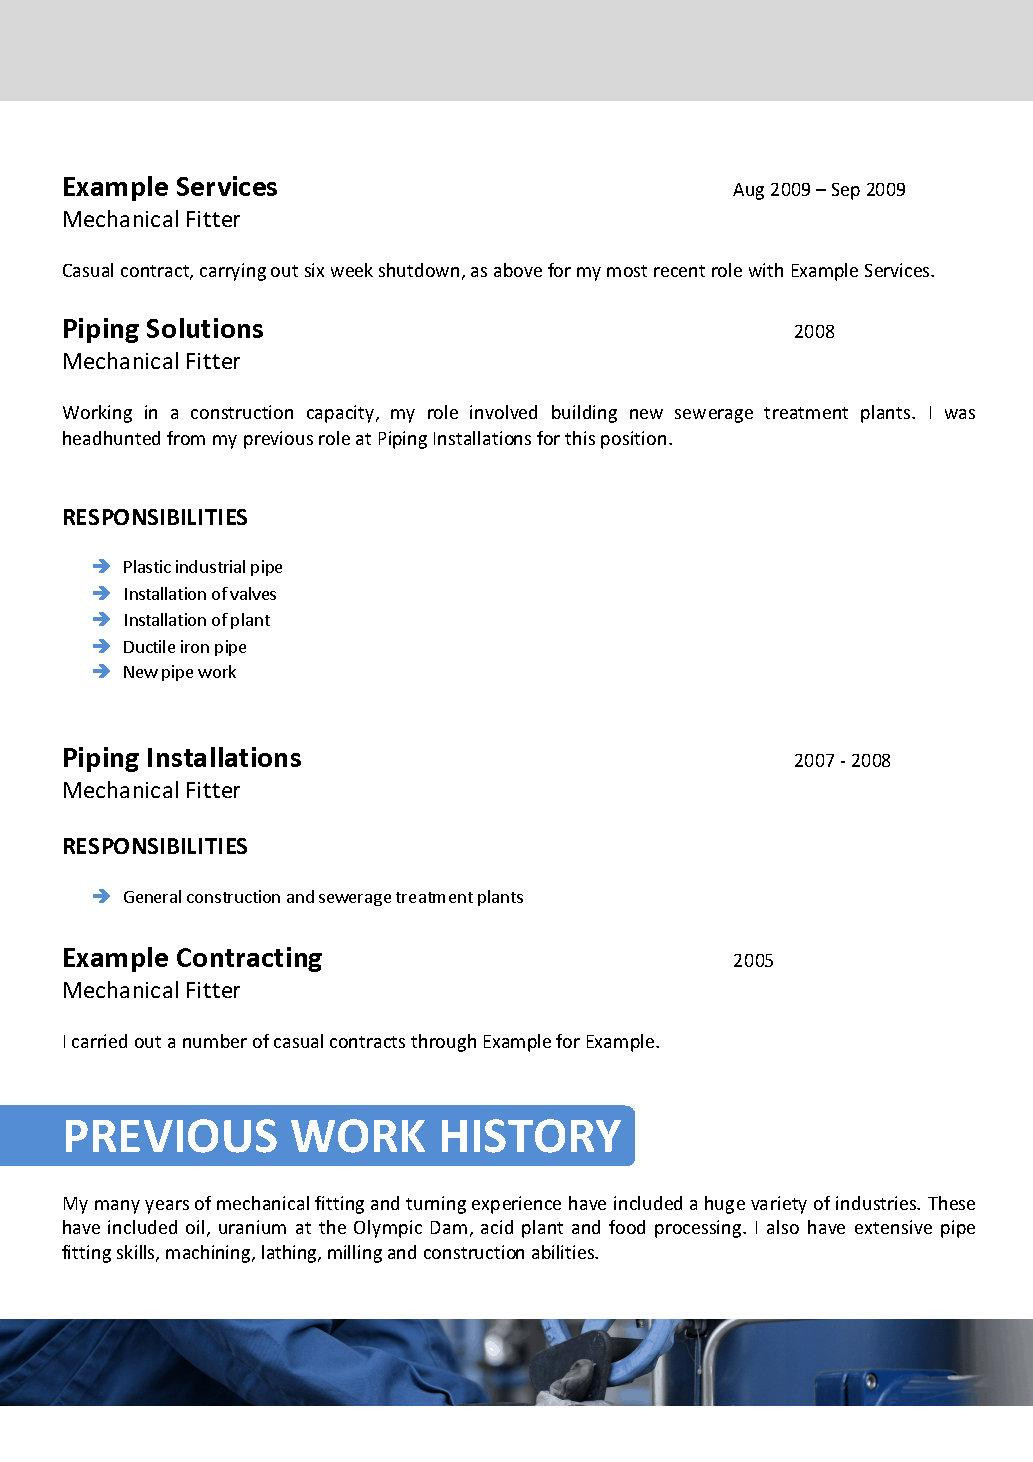 Resume Templates for Oil and Gas Industry Oil and Gas Resume Template 074